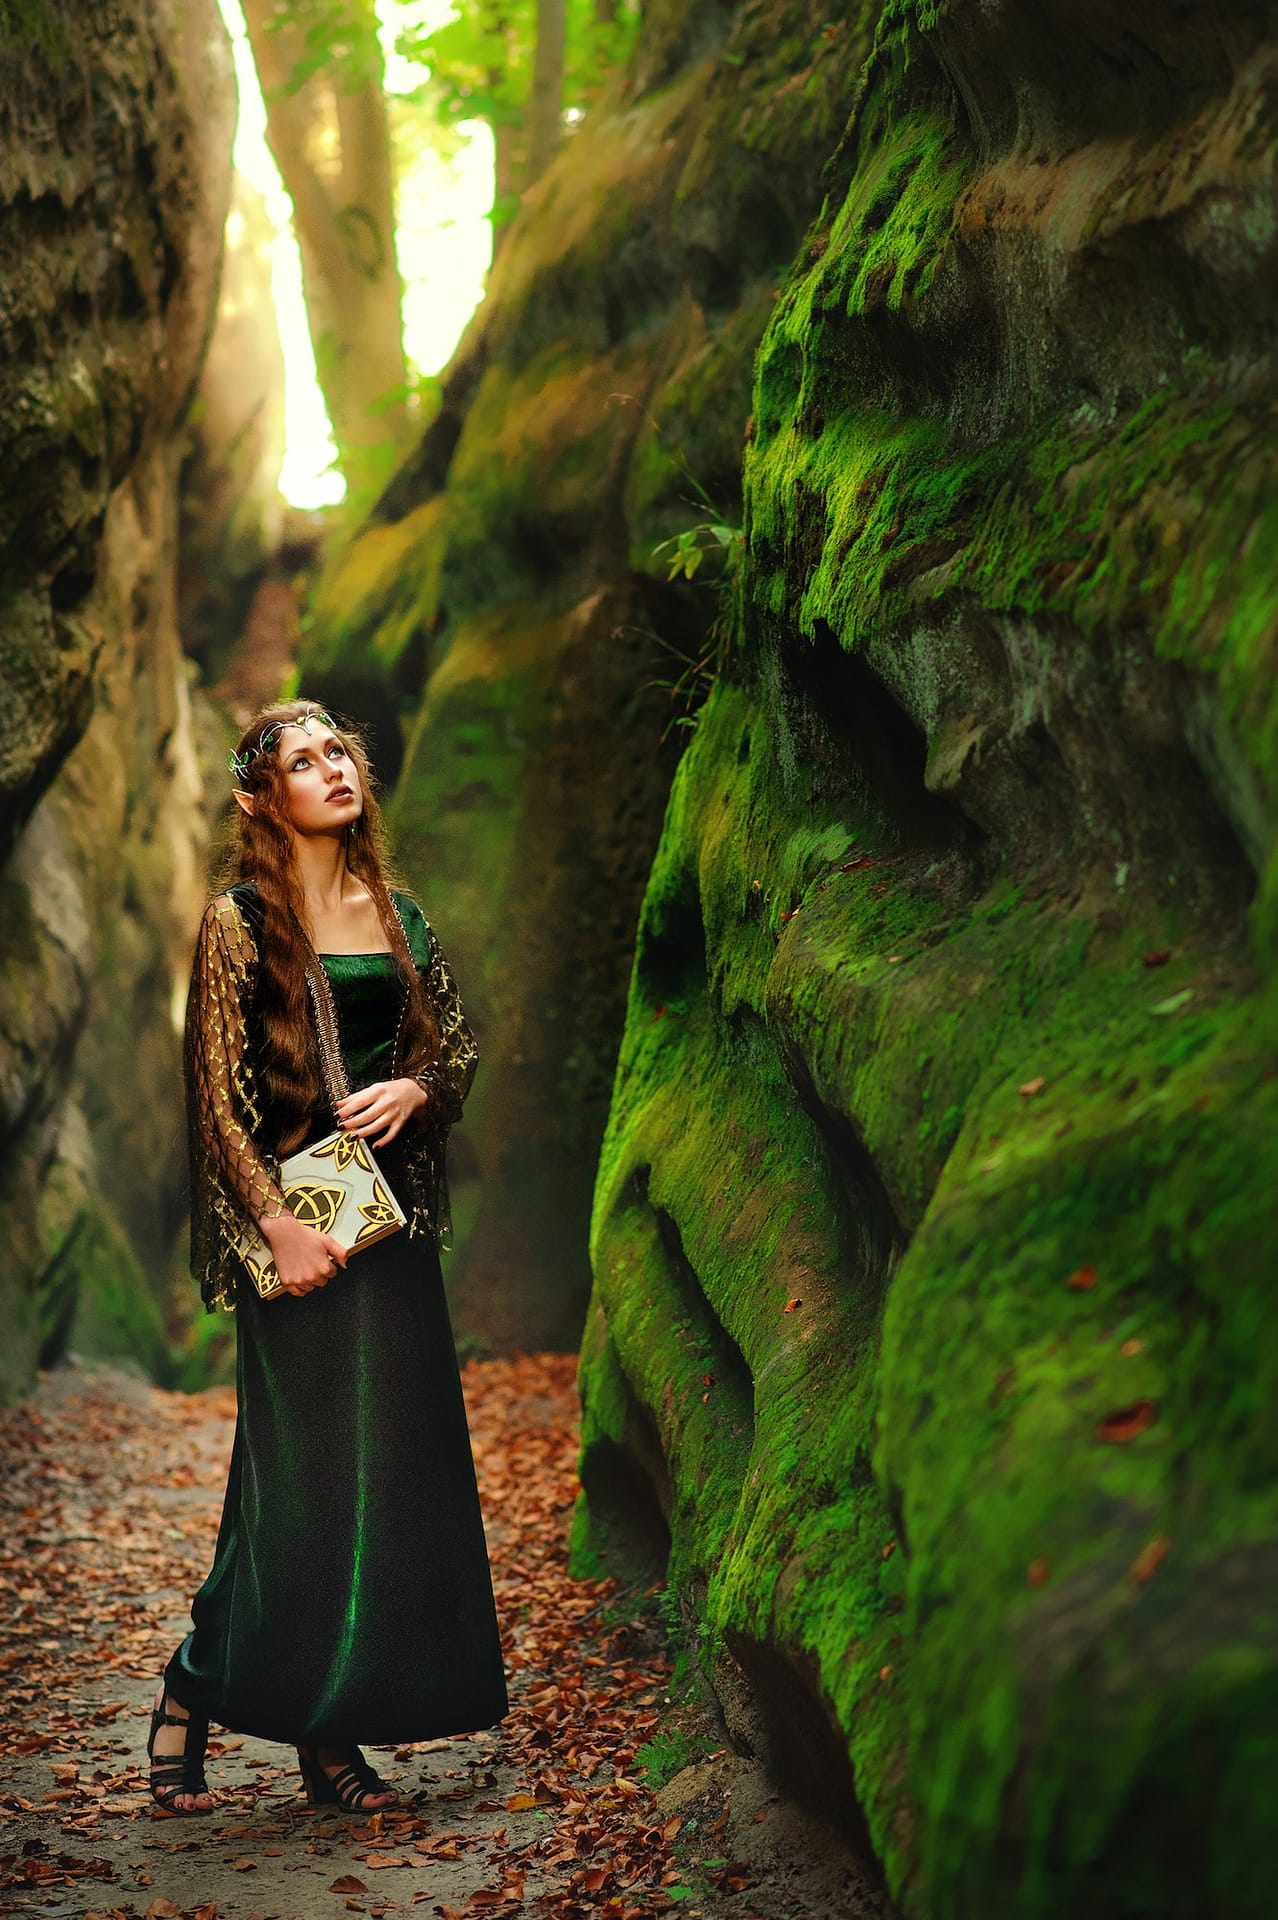 Young female elf wandering in the forest holding an old book